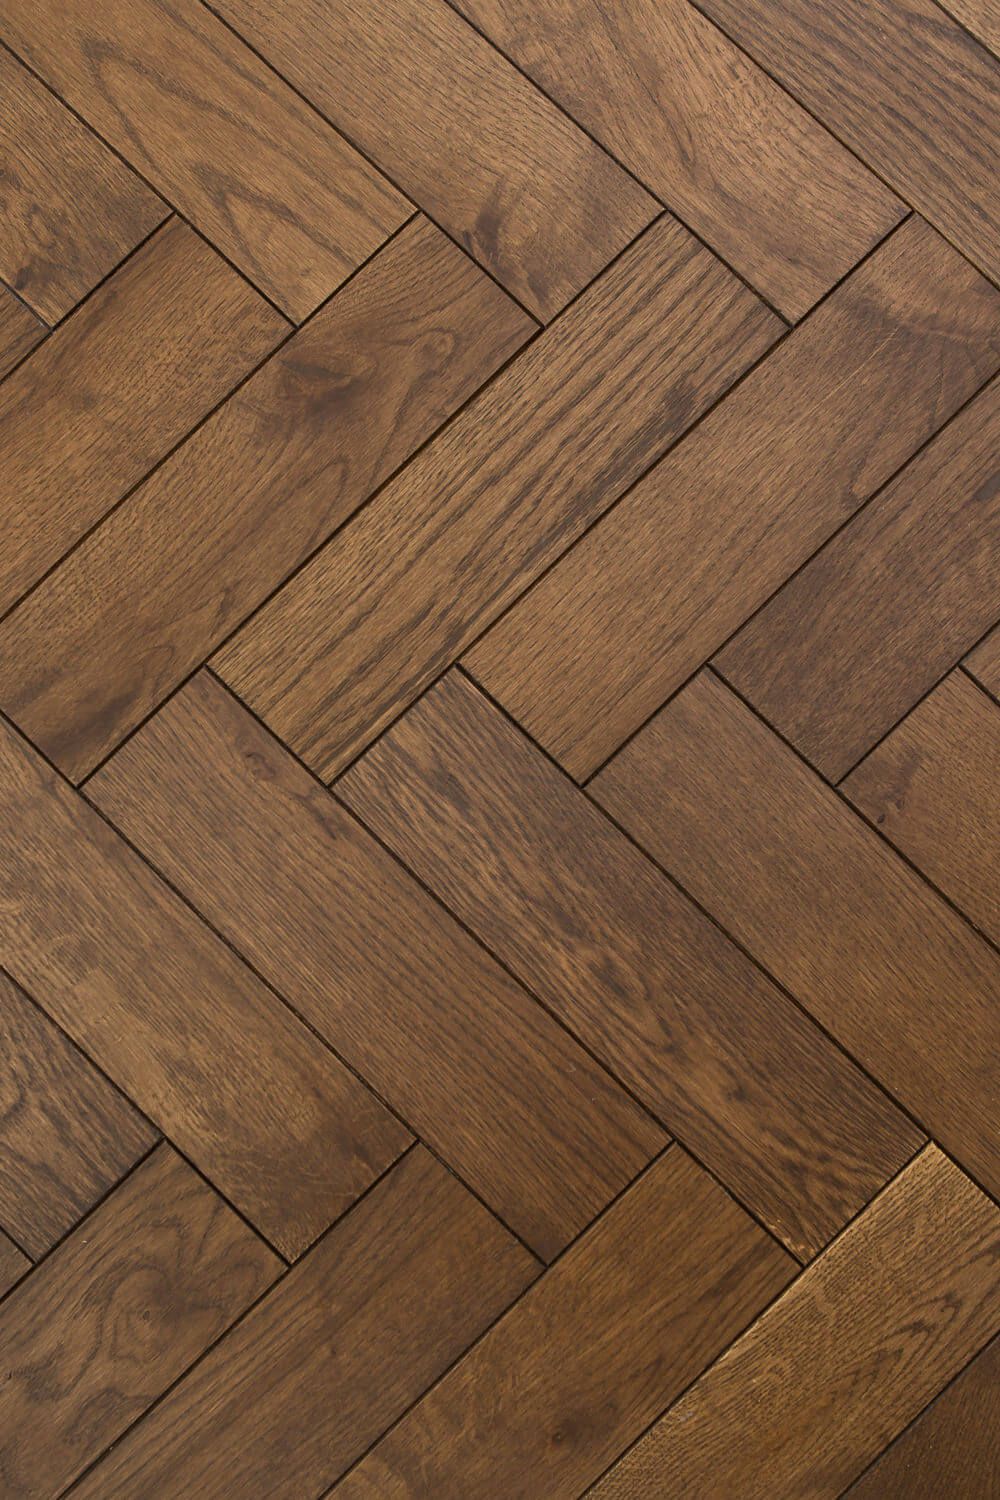 An overview of different types of wood
flooring